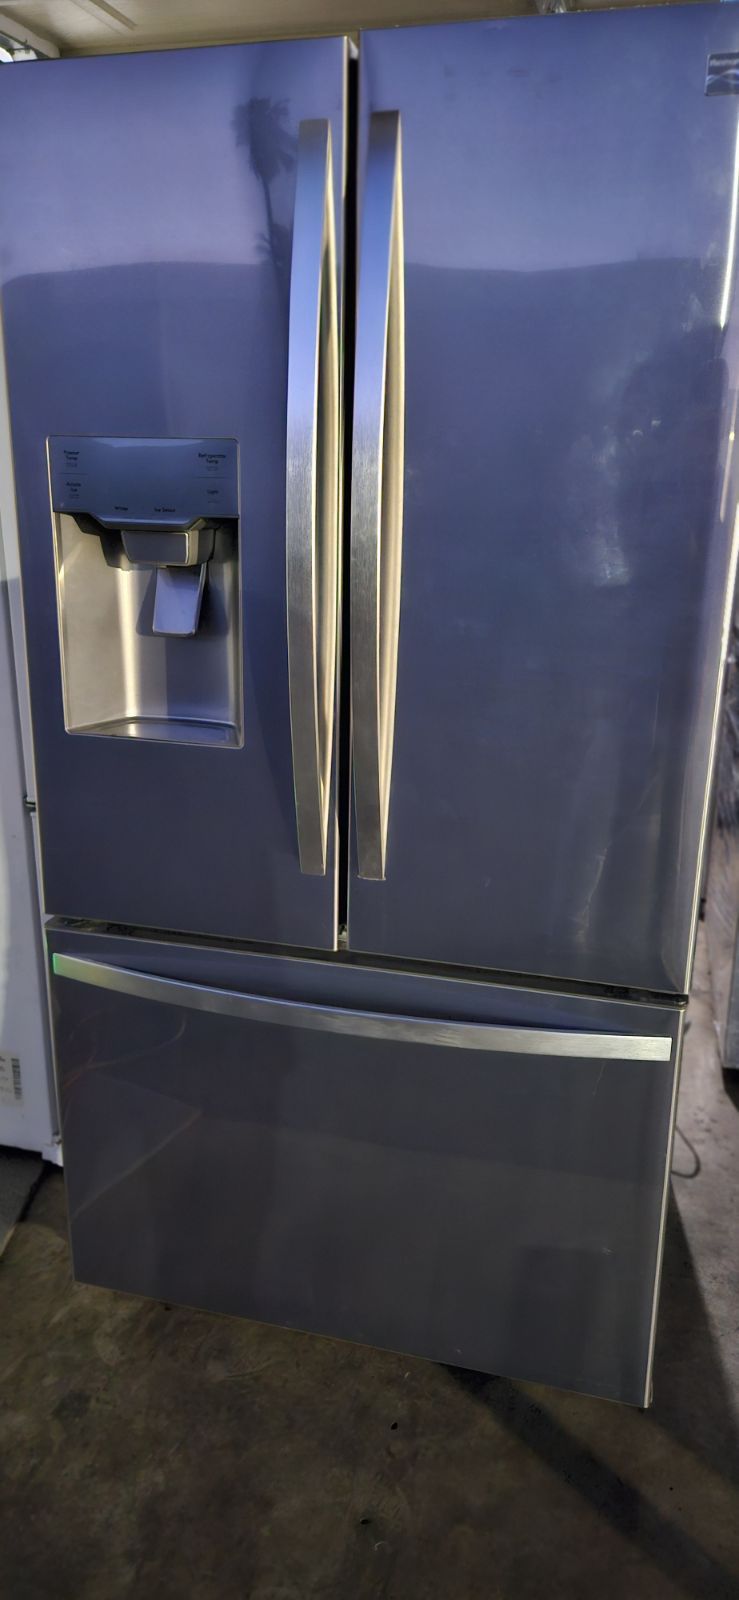 Selling a Kenmore refrigerator 